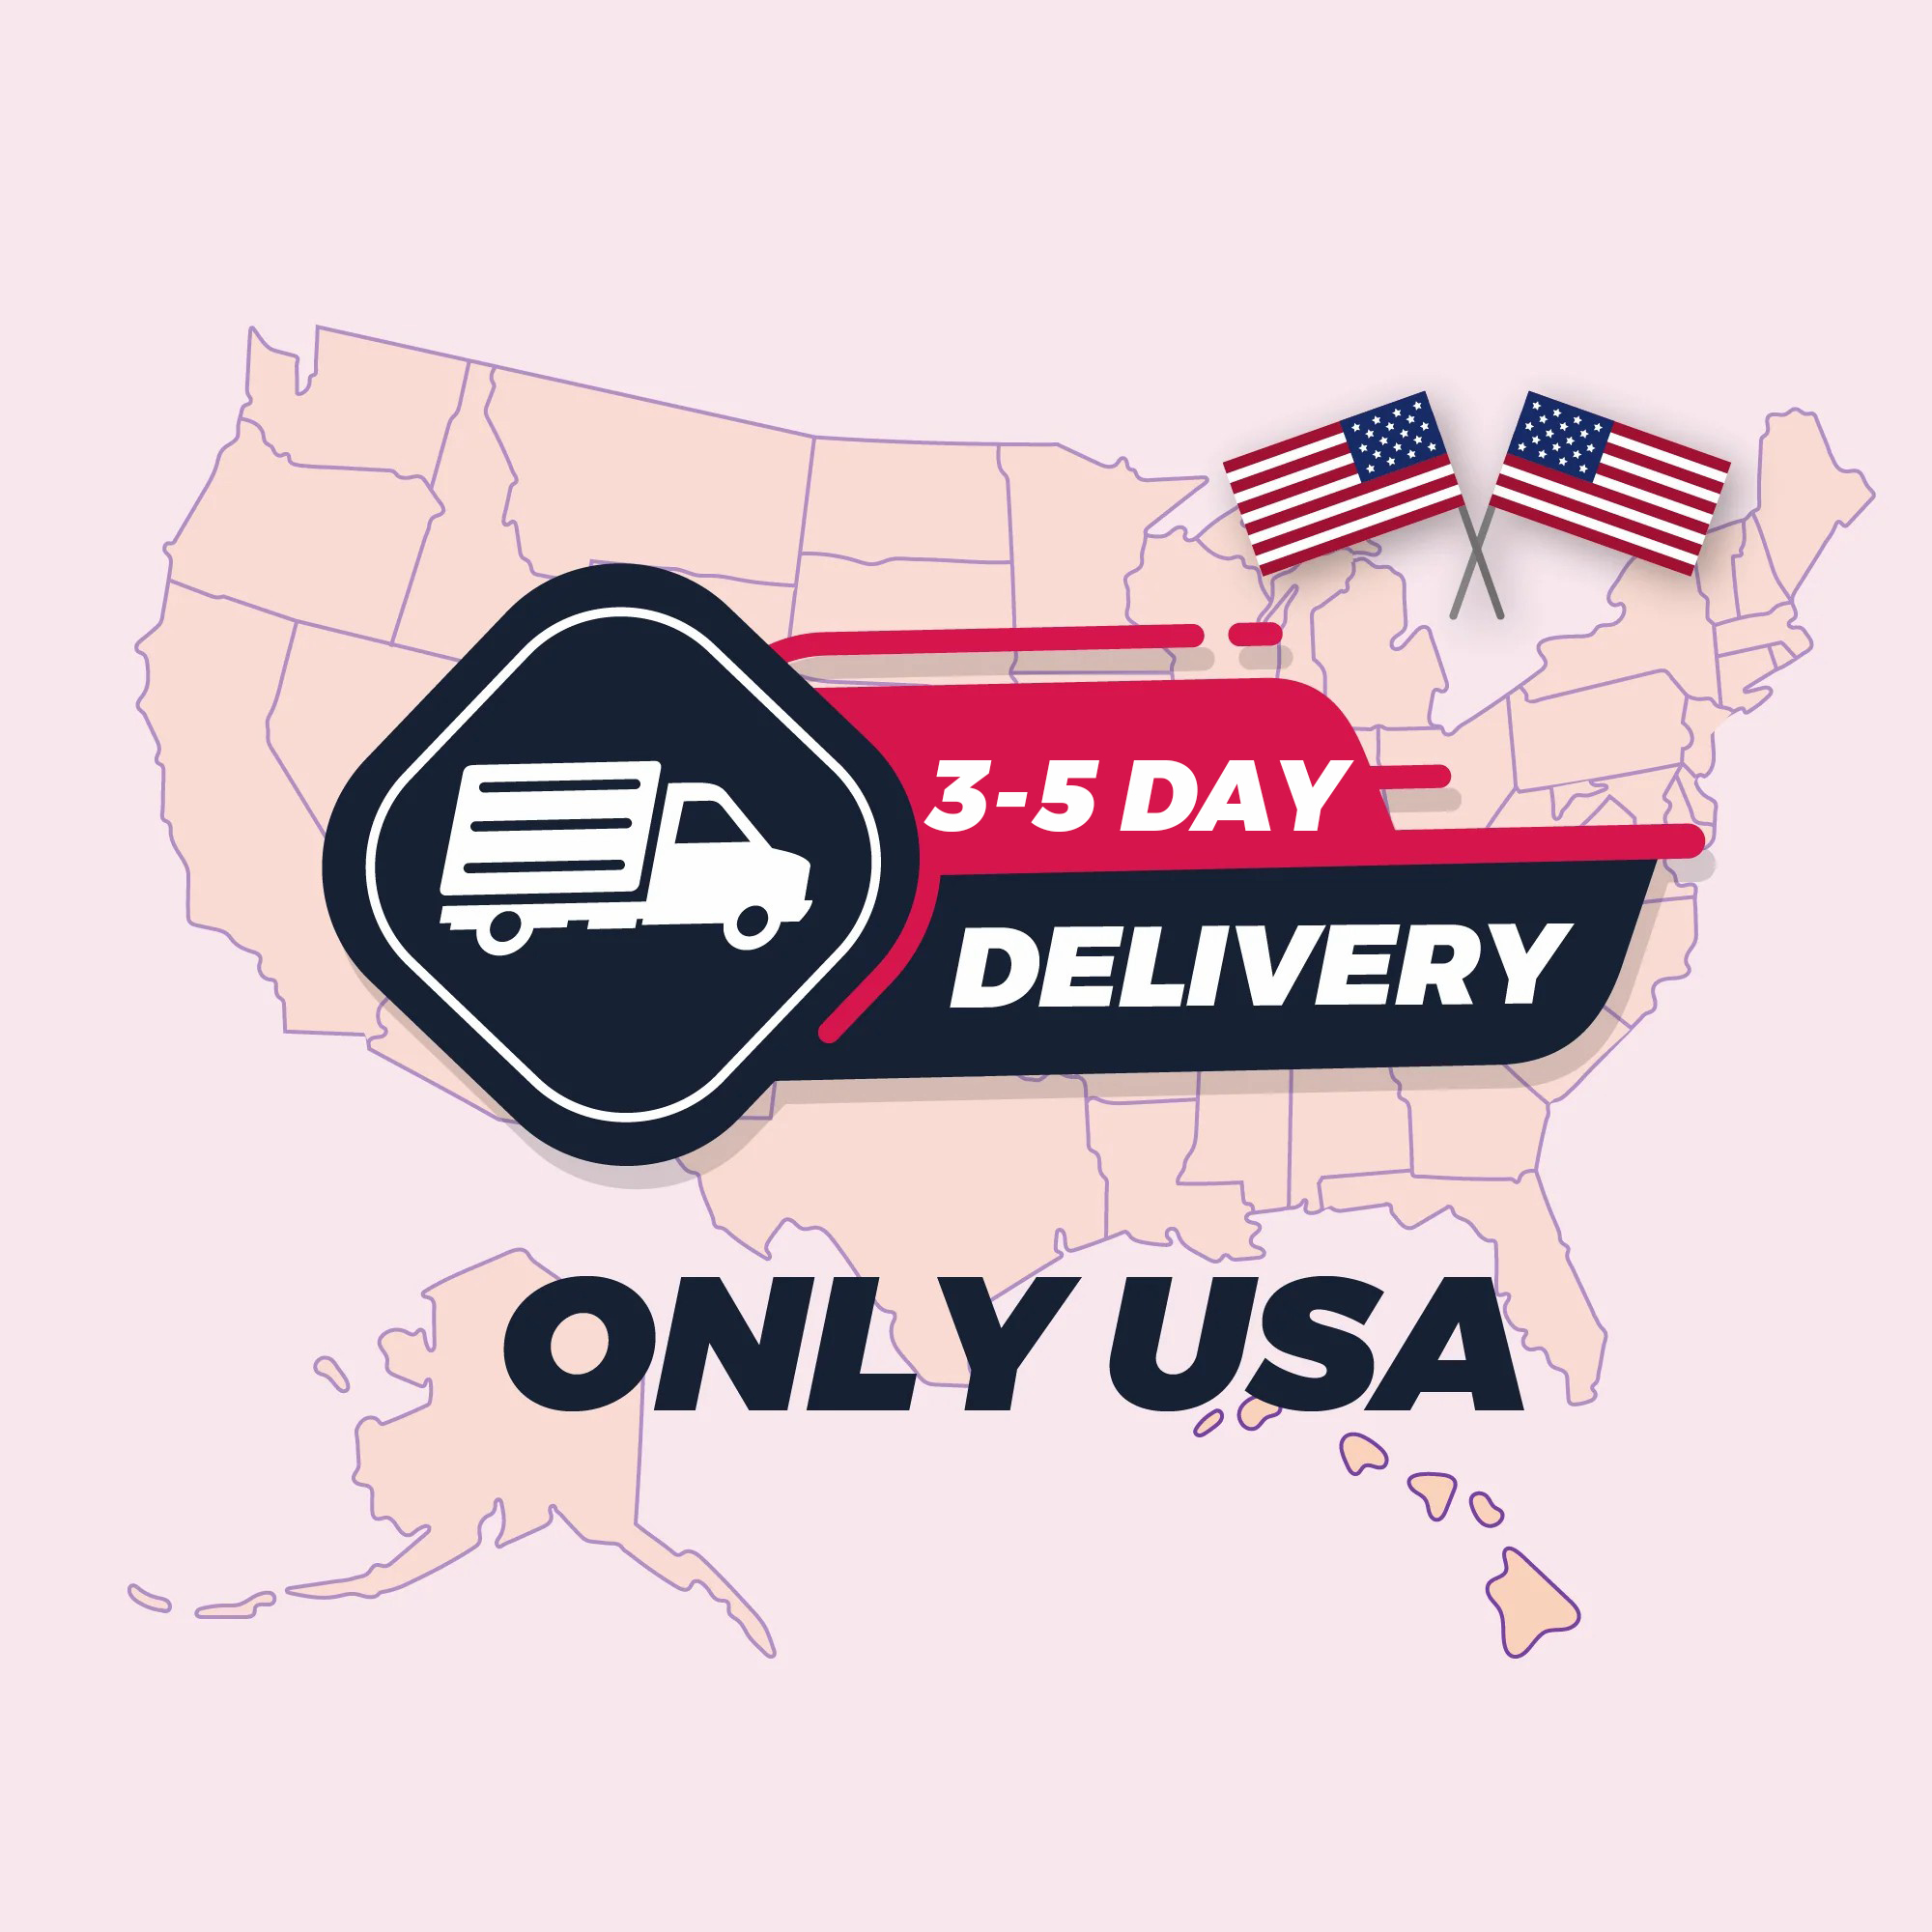 USA 3-5 DAY DELIVERY